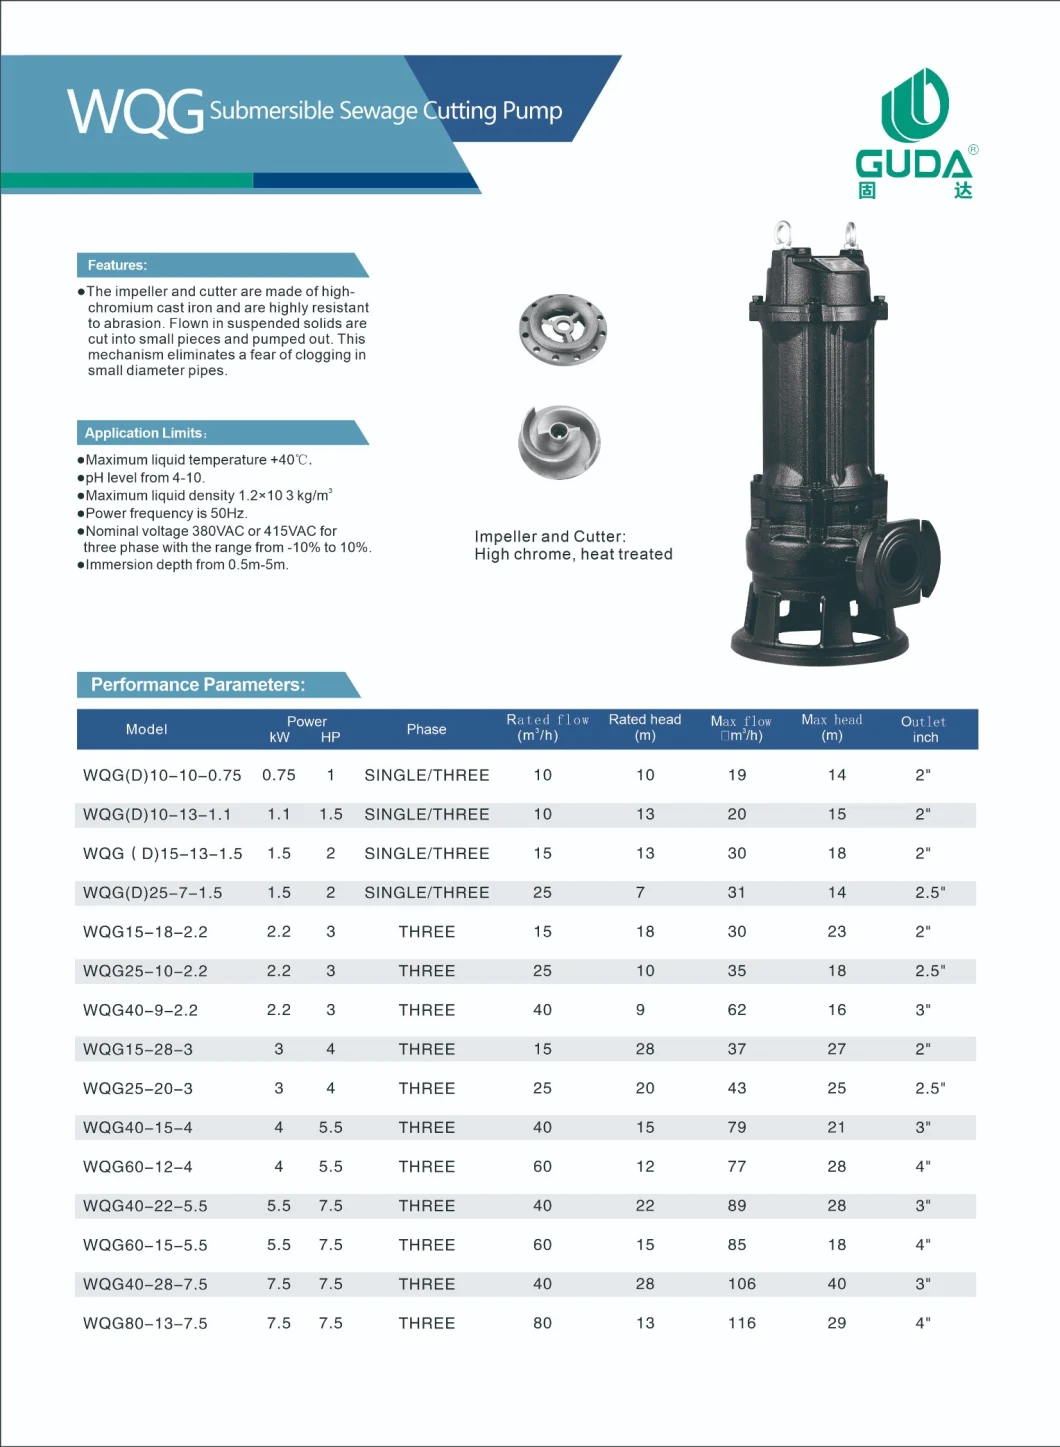 Centrifugal Non-Clog Electric Industrial Submersible Cutting/Grinding Sewage Pump for Dirty and Waste Water Treatment